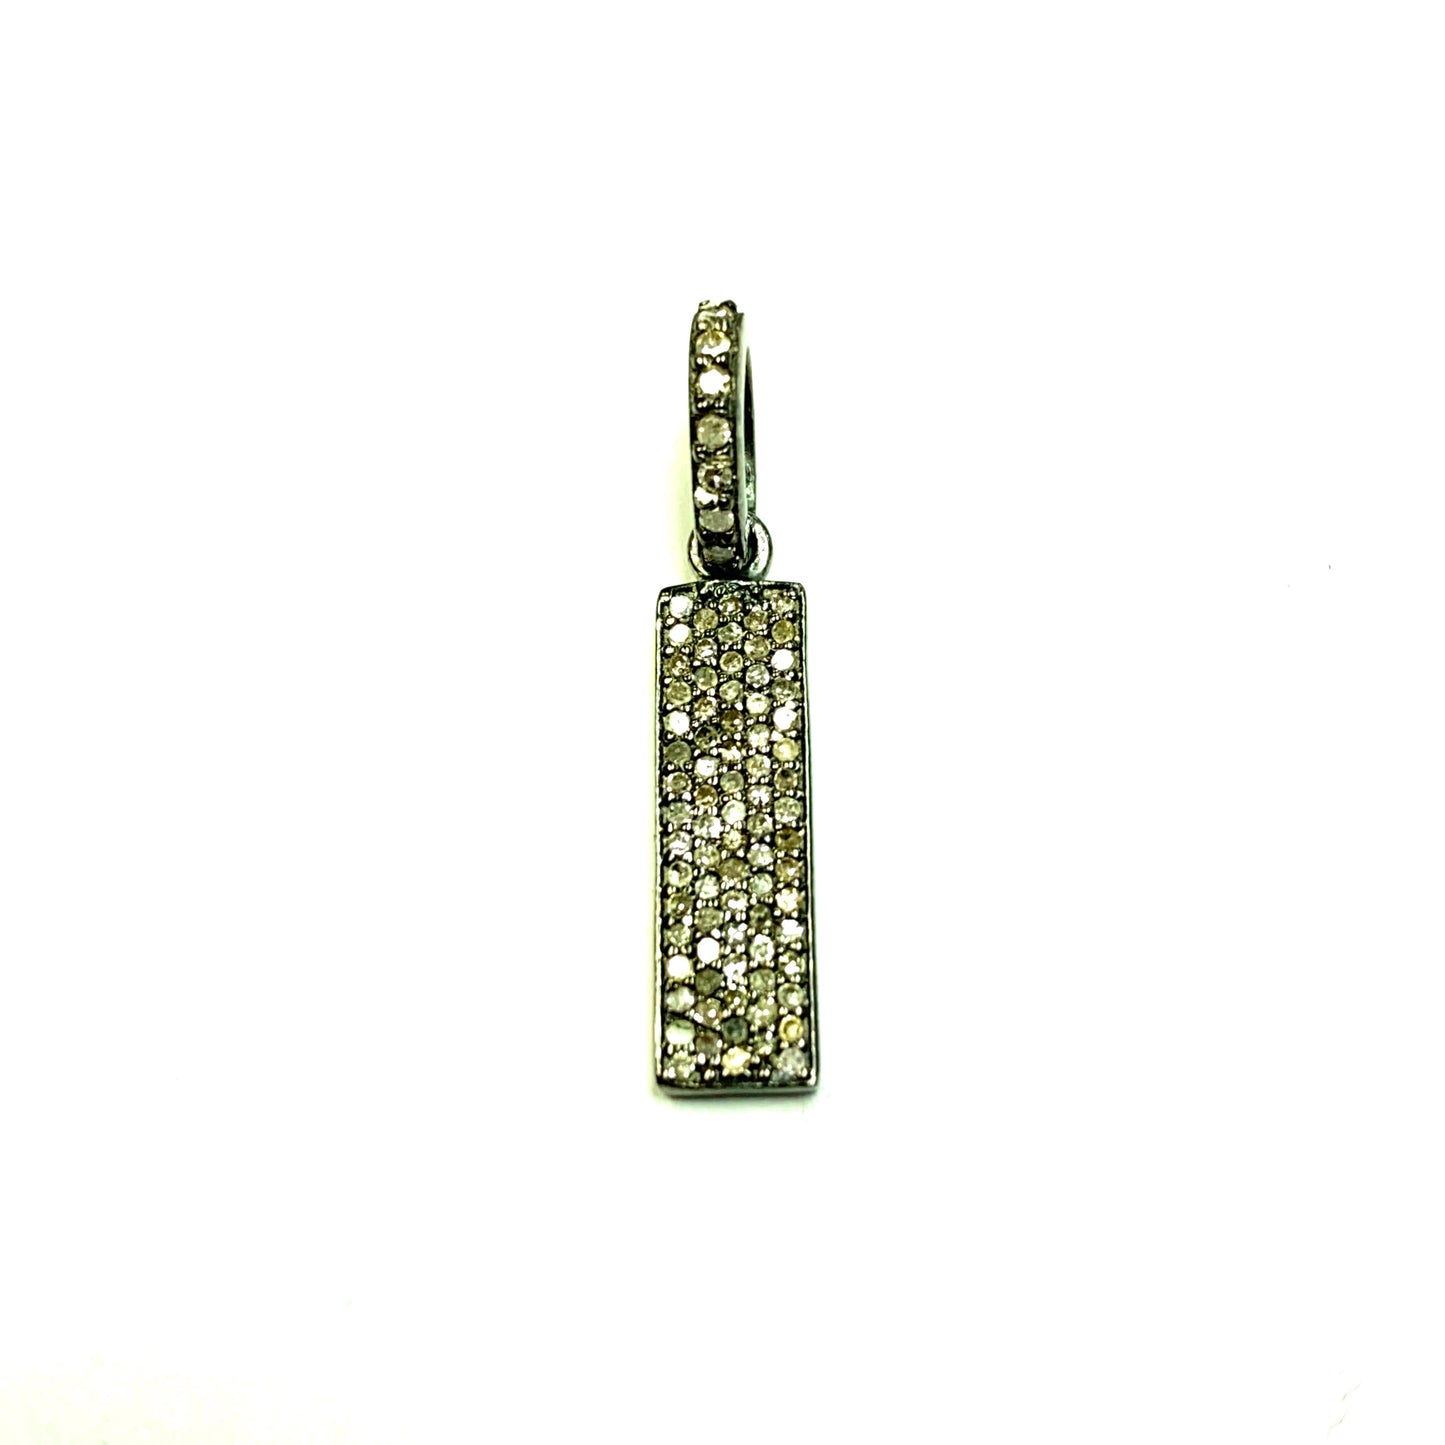 Rectangle Diamond Charms .925 Oxidized Sterling Silver Diamond Charms, Genuine handmade pave diamond Charm Size Approx 0.72"(6 x 18 mm)